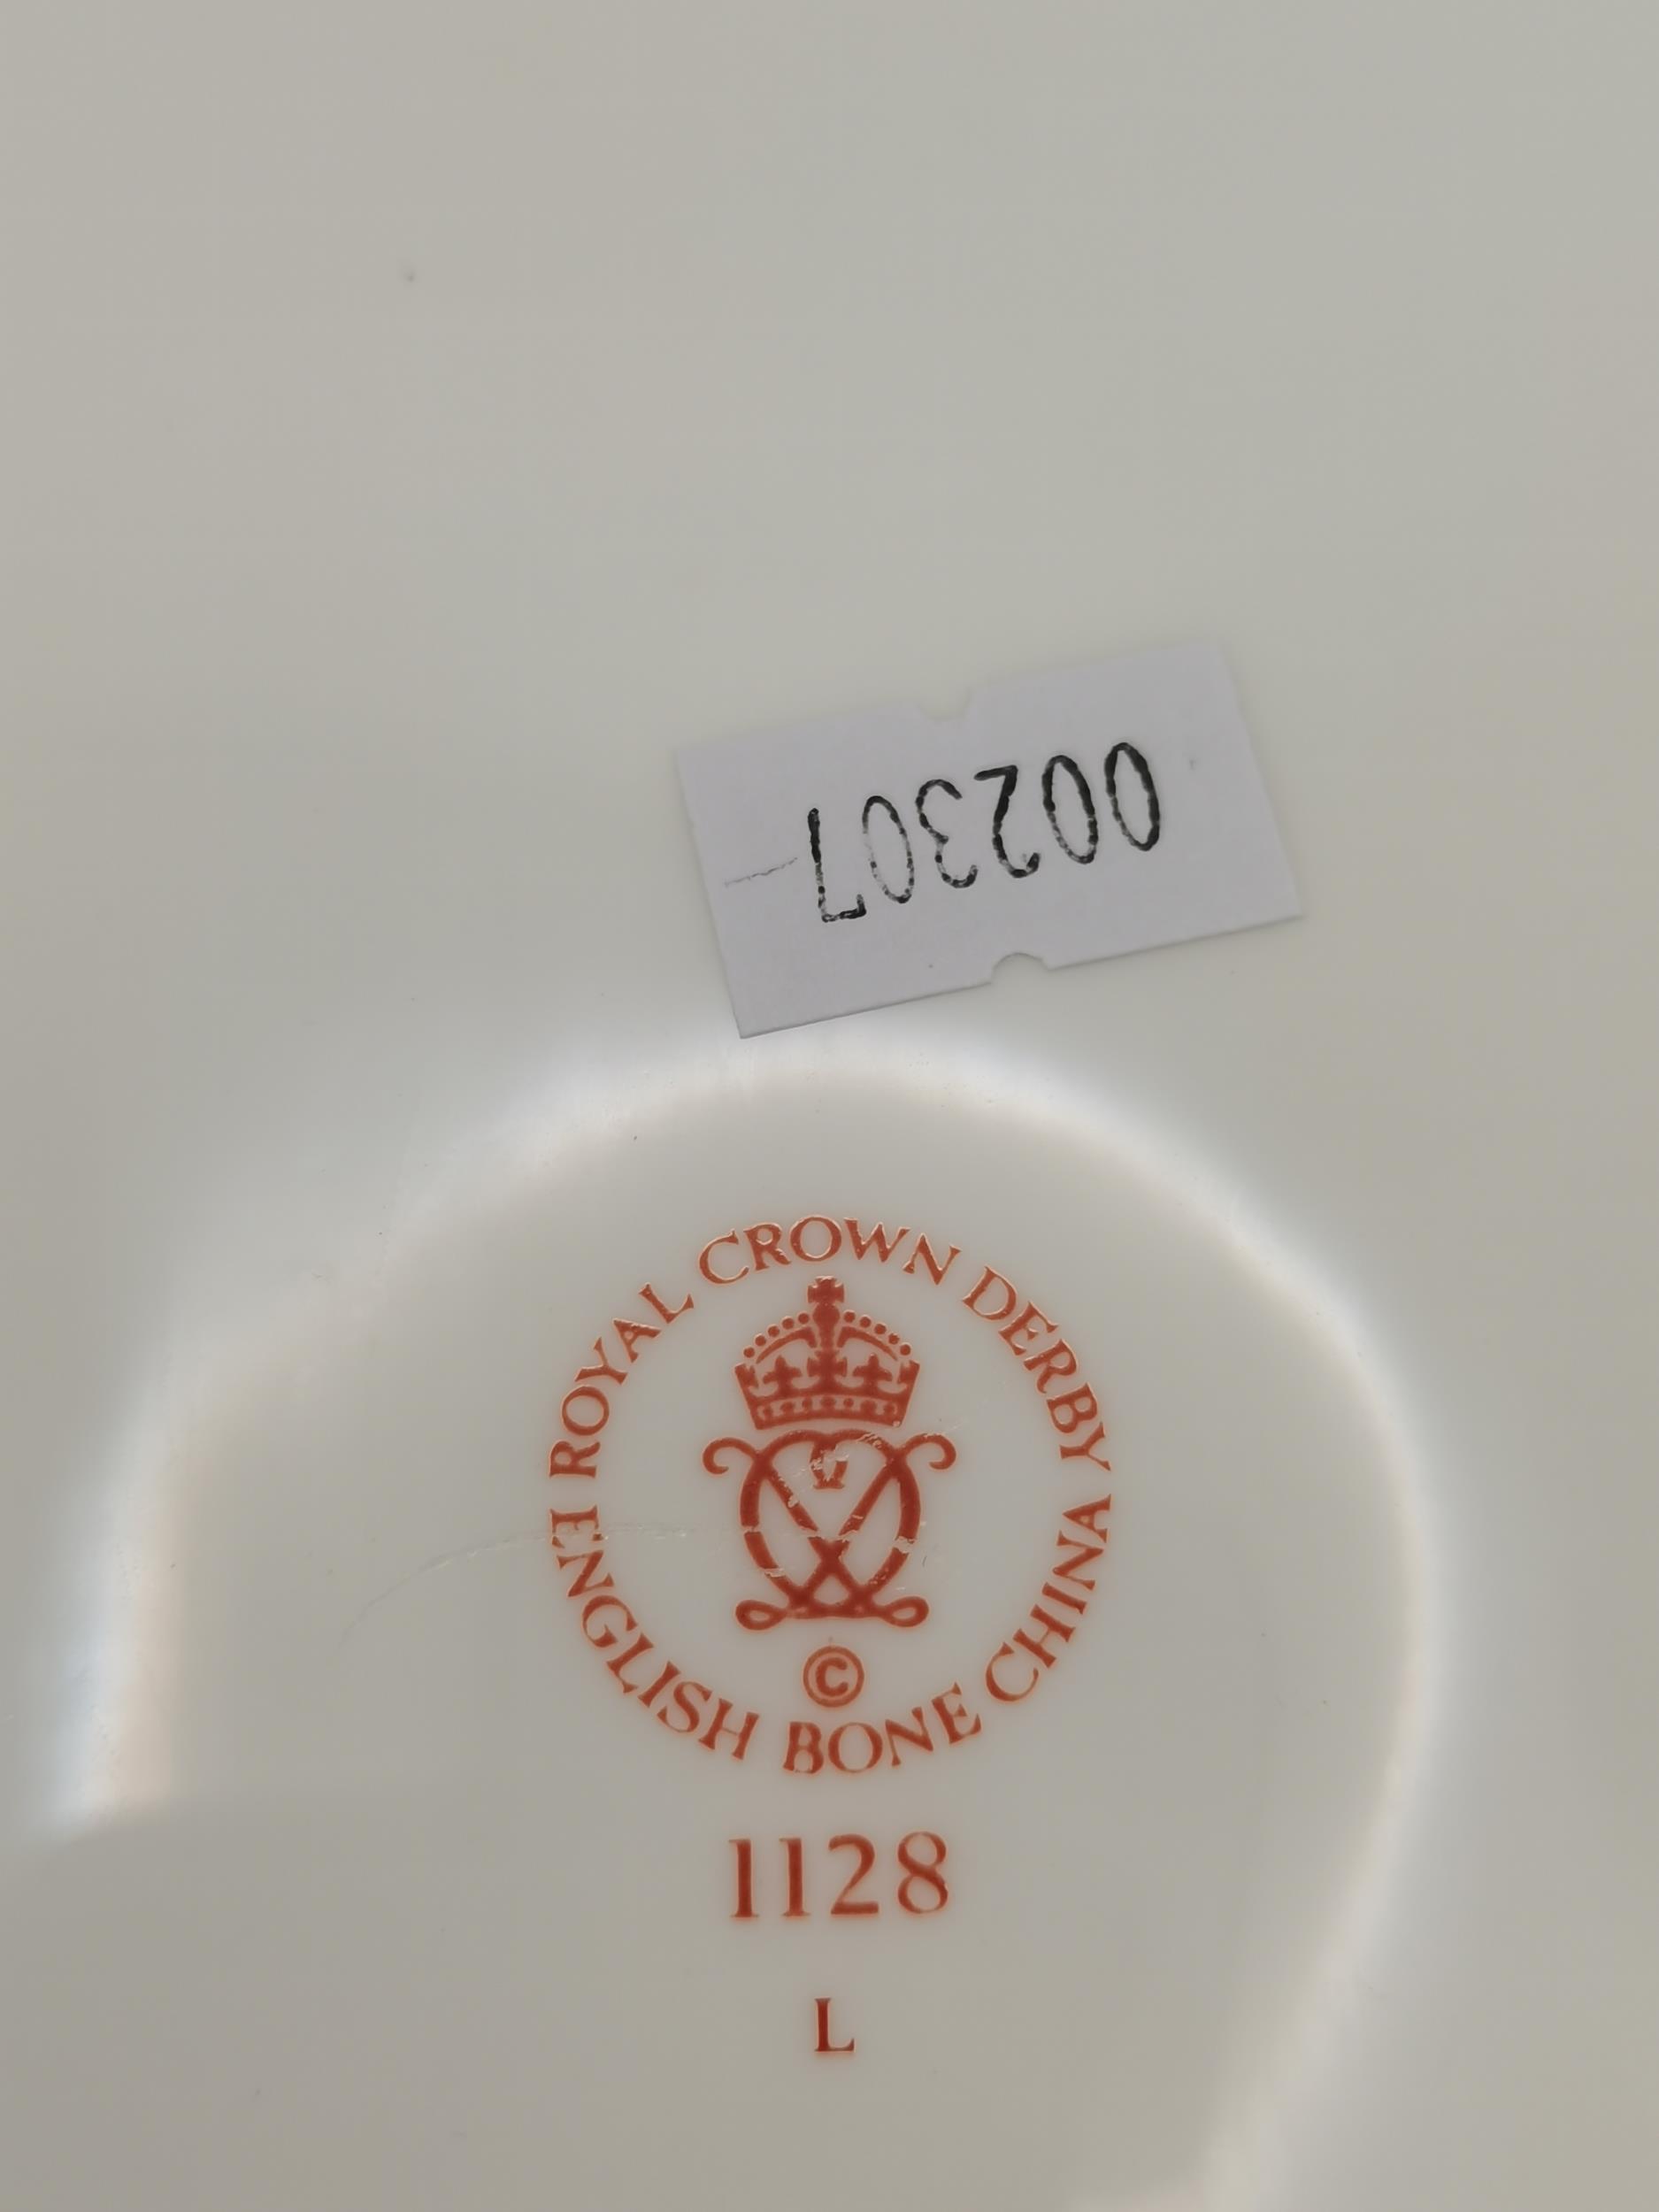 Crown Derby cake plate D 28cm and knife - Image 2 of 2